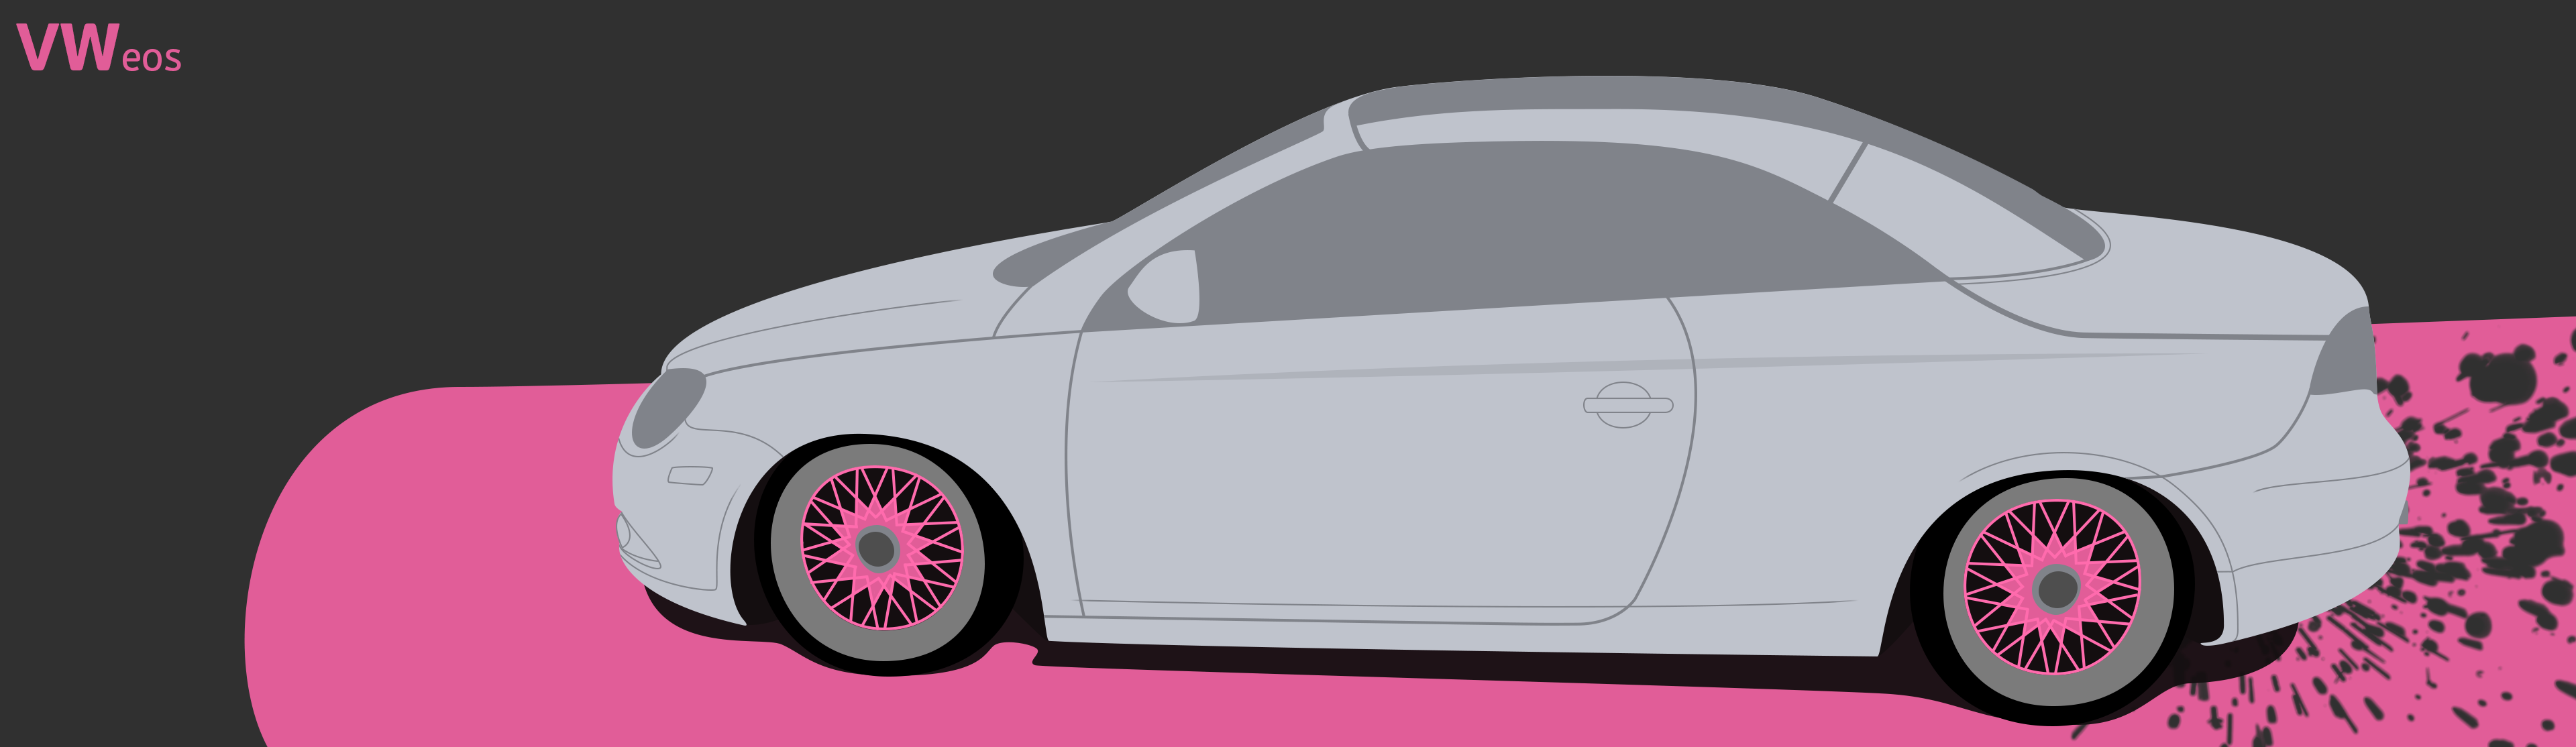 vw_eos_by_imabo-d7zjvtp.png